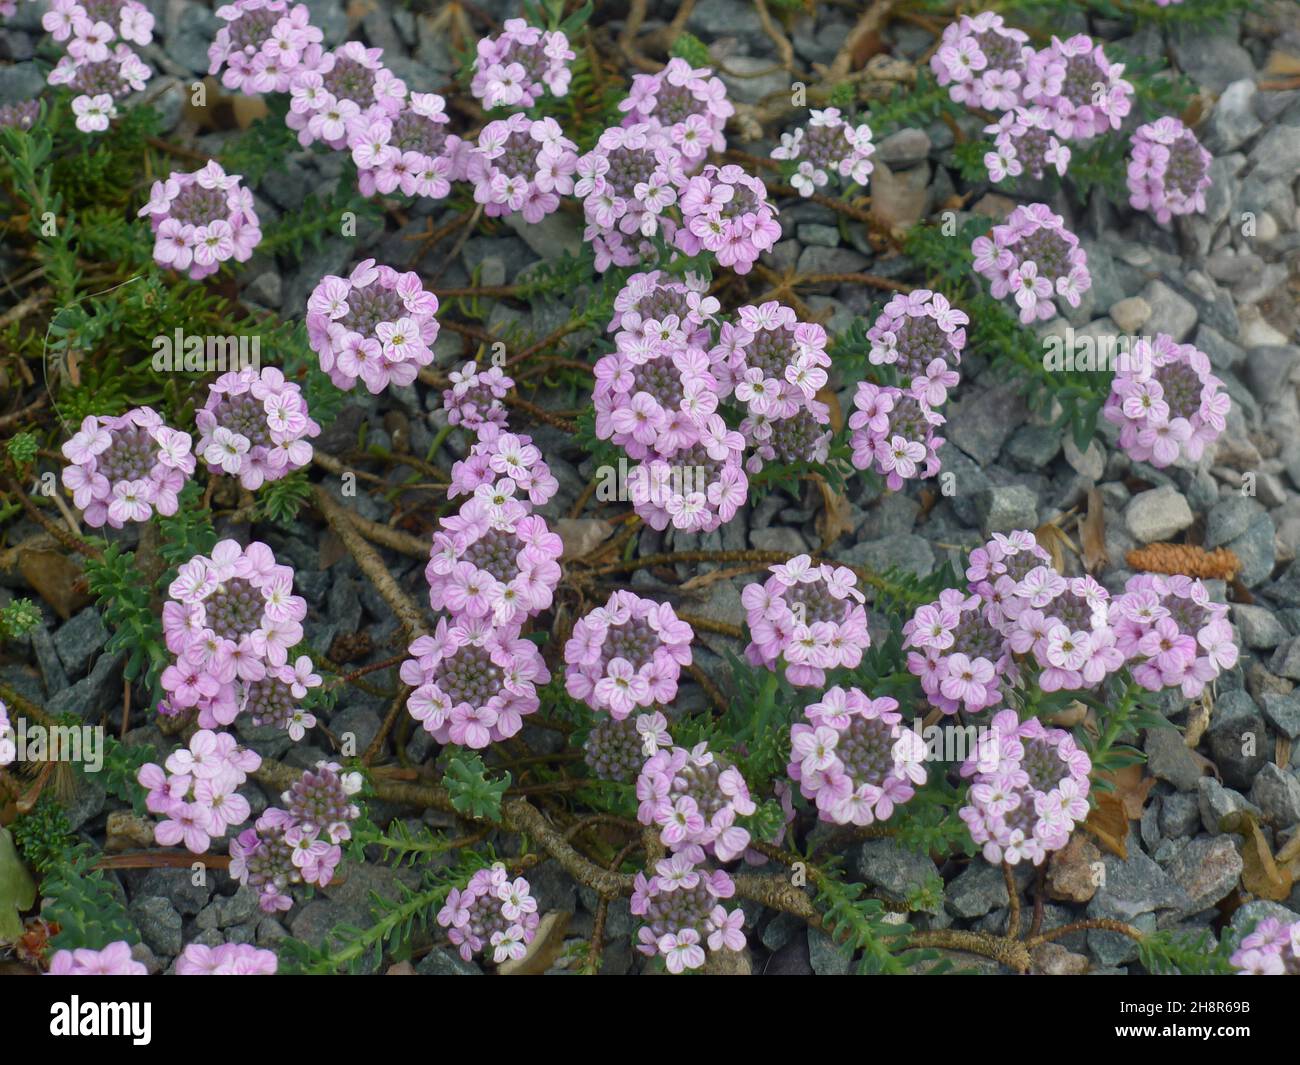 Stonecress (Aethionema kotschyi) blooms in a stone garden in May Stock Photo